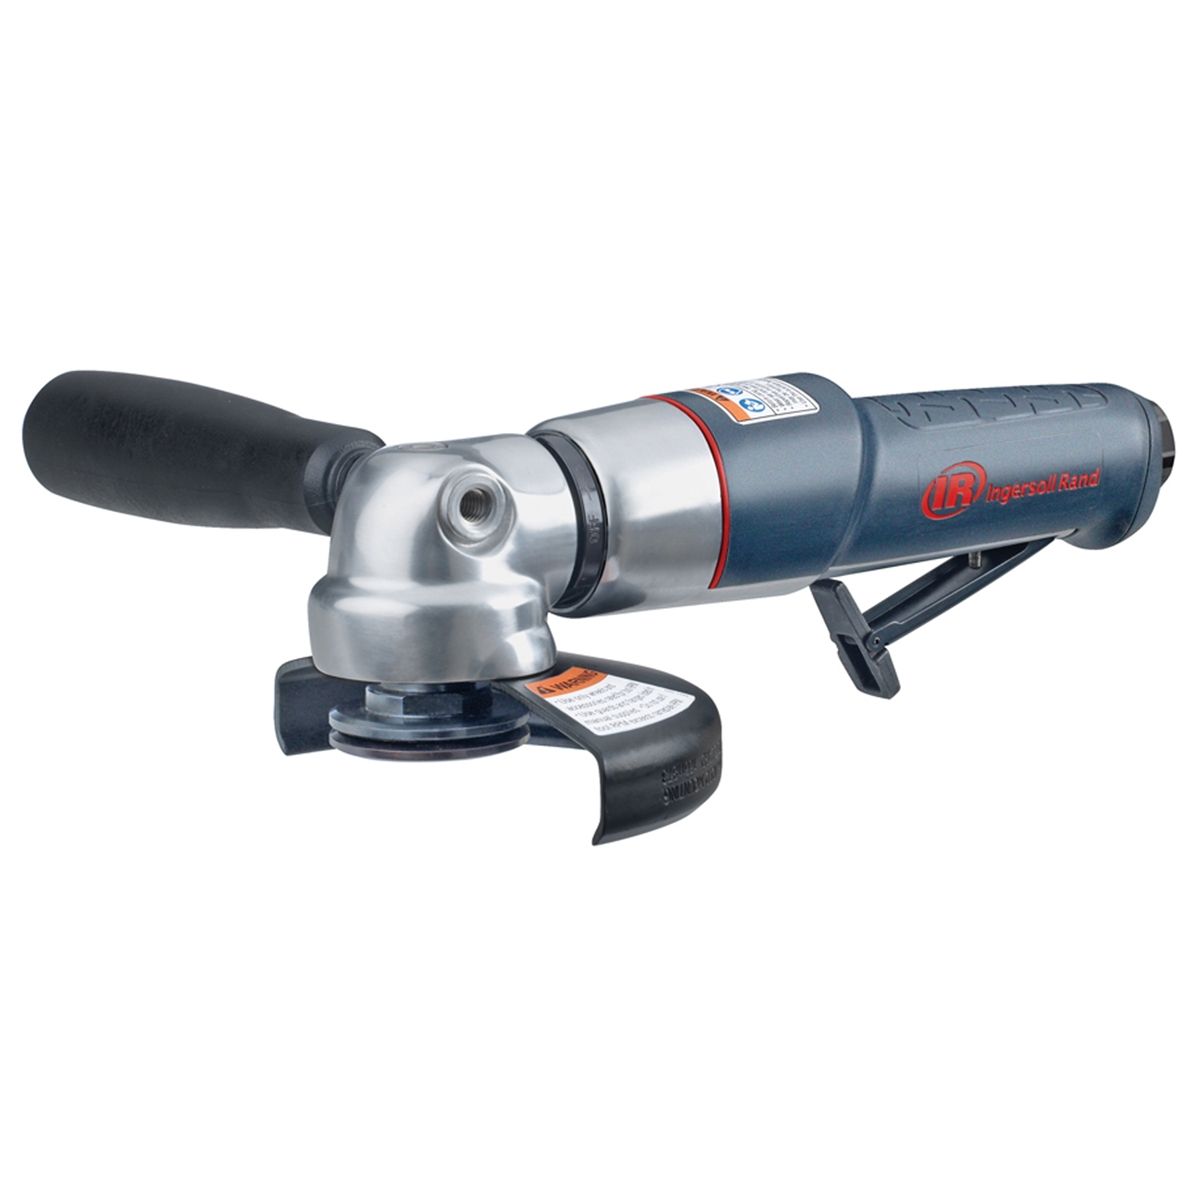 4.5 Inch Angle Air Grinder with 4.5" Grinding Wheel